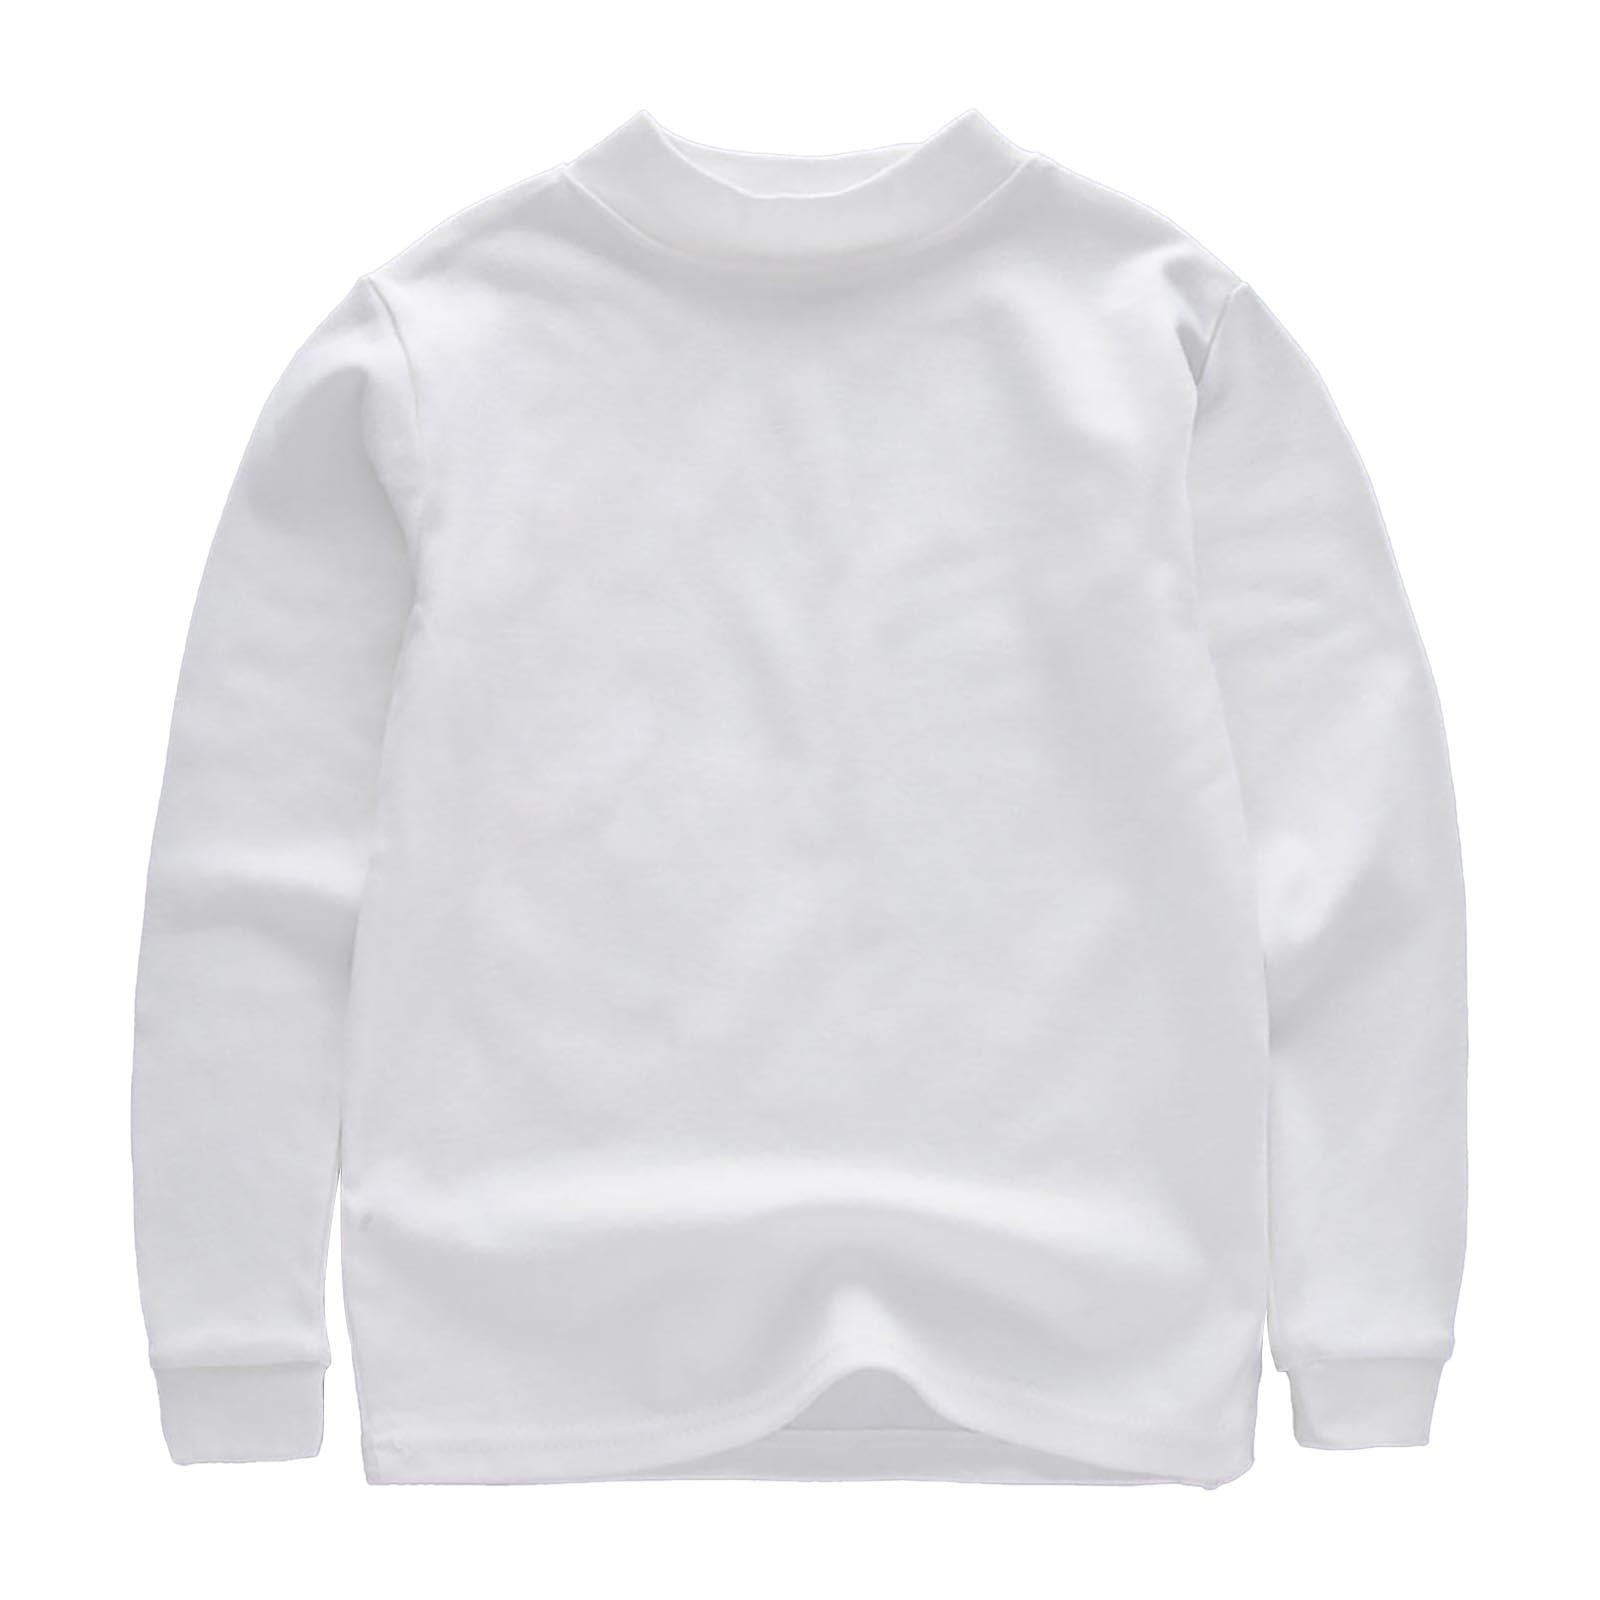 Wiueurtly 2 Boys And Girls' Classic Fit Crewneck T Shirt | Organic ...